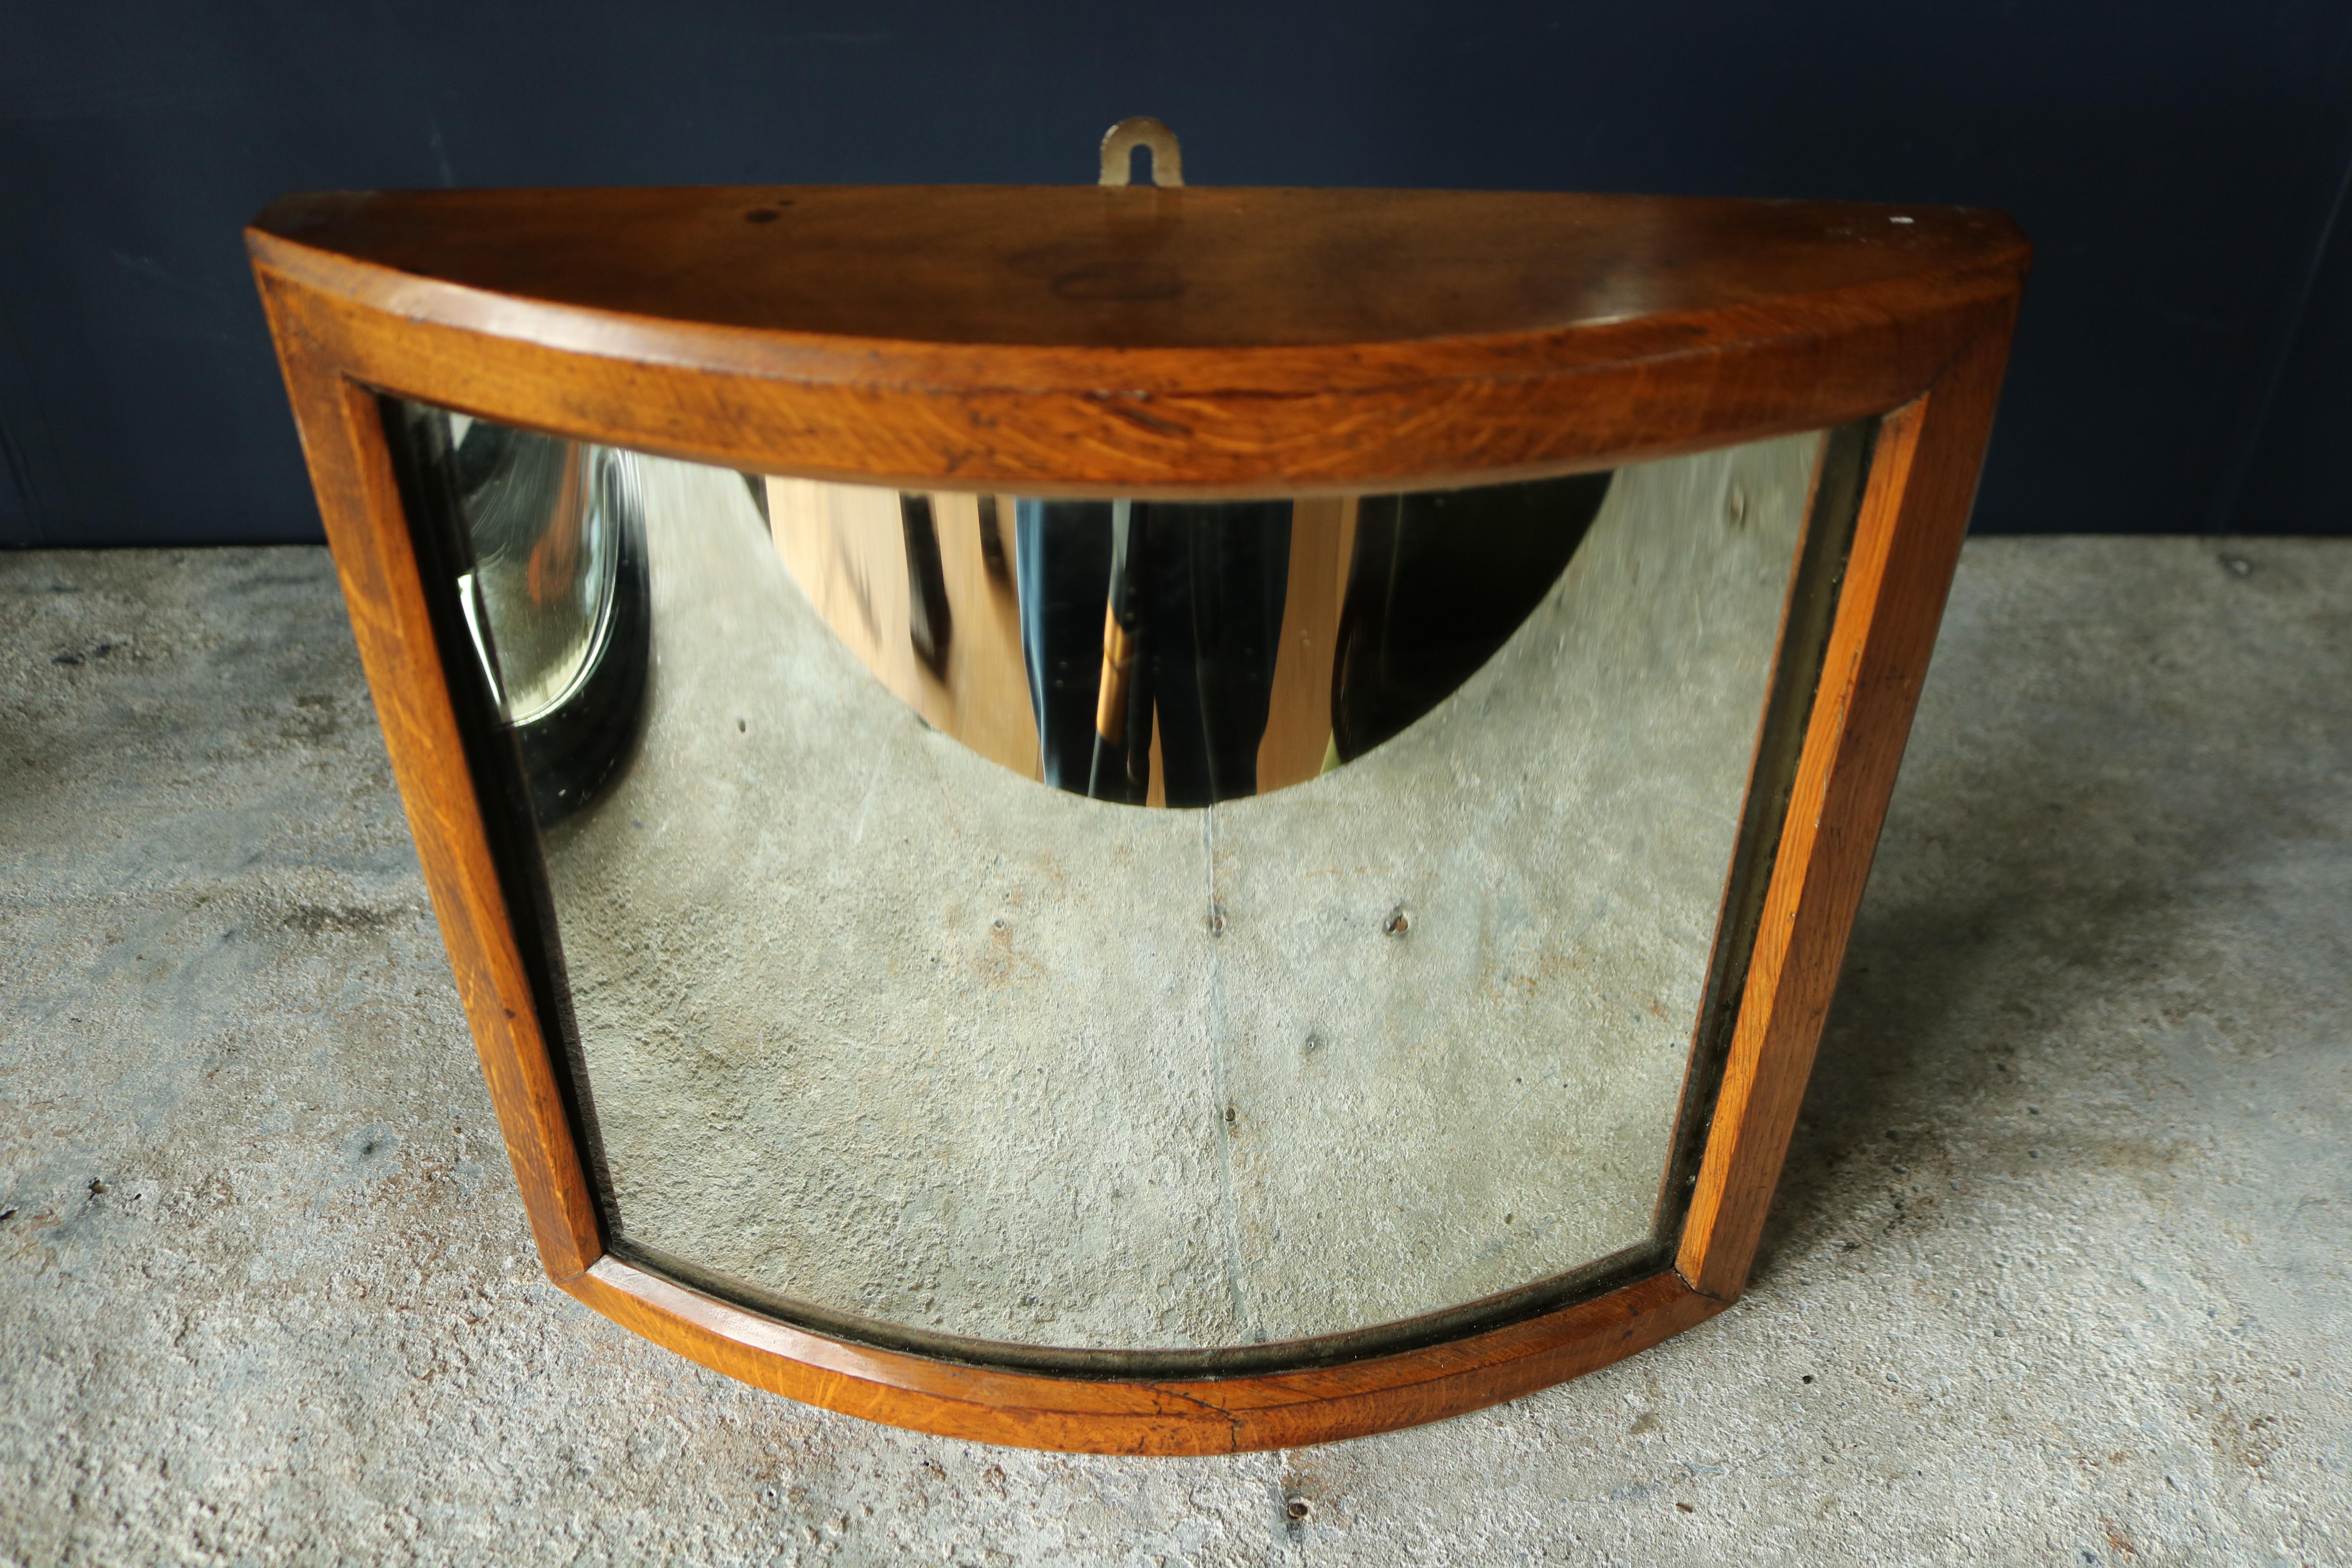 A late 19th century fairground mirror set in a beautiful golden oak frame with its original distortion mirror plate.